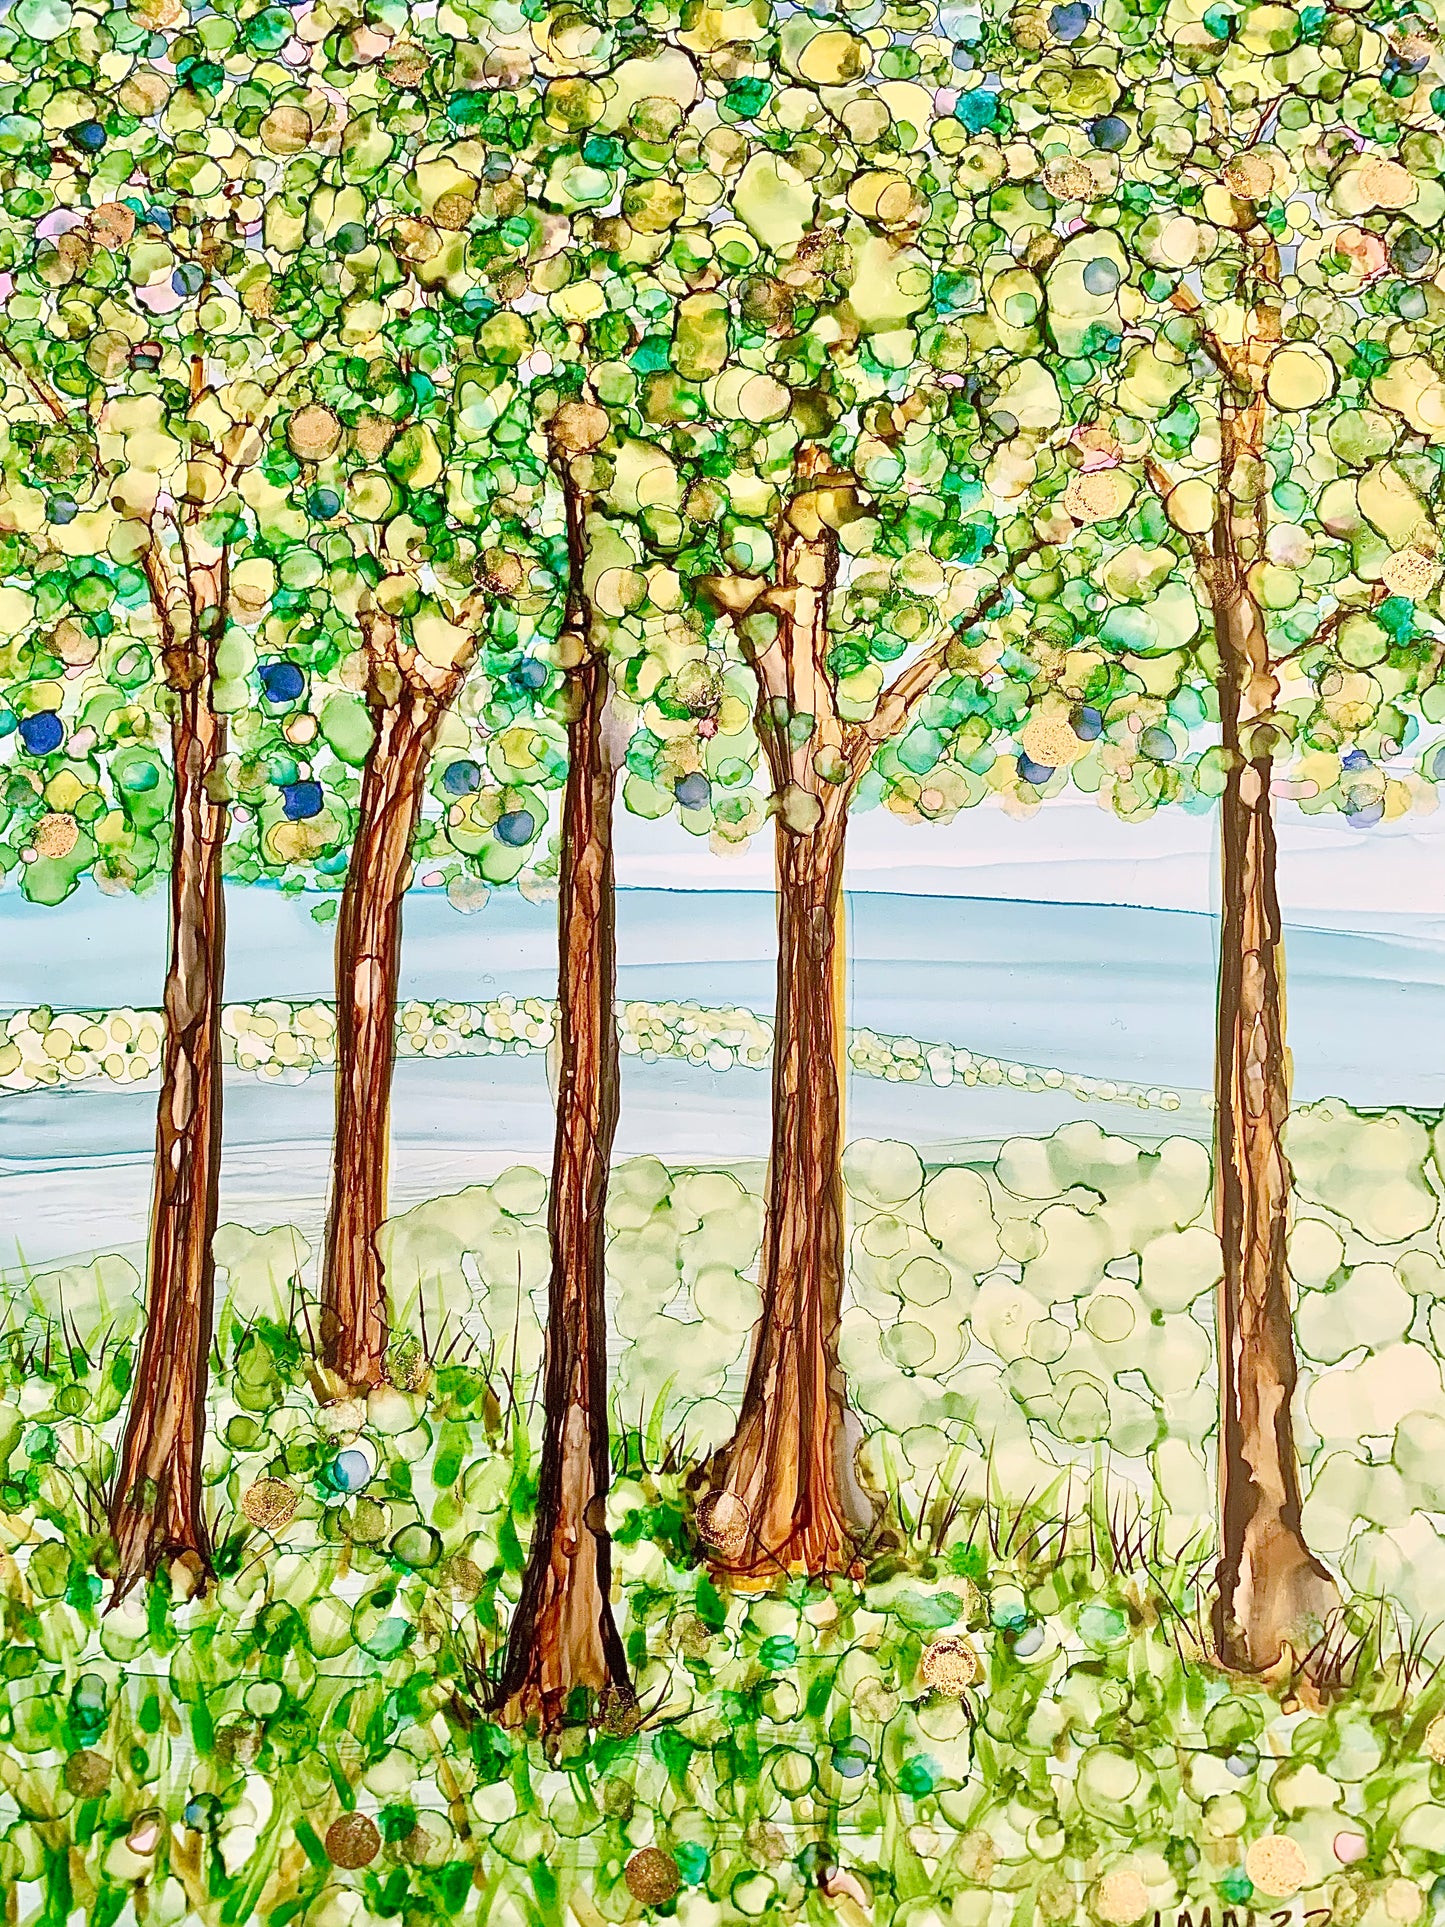 Trees By the Water